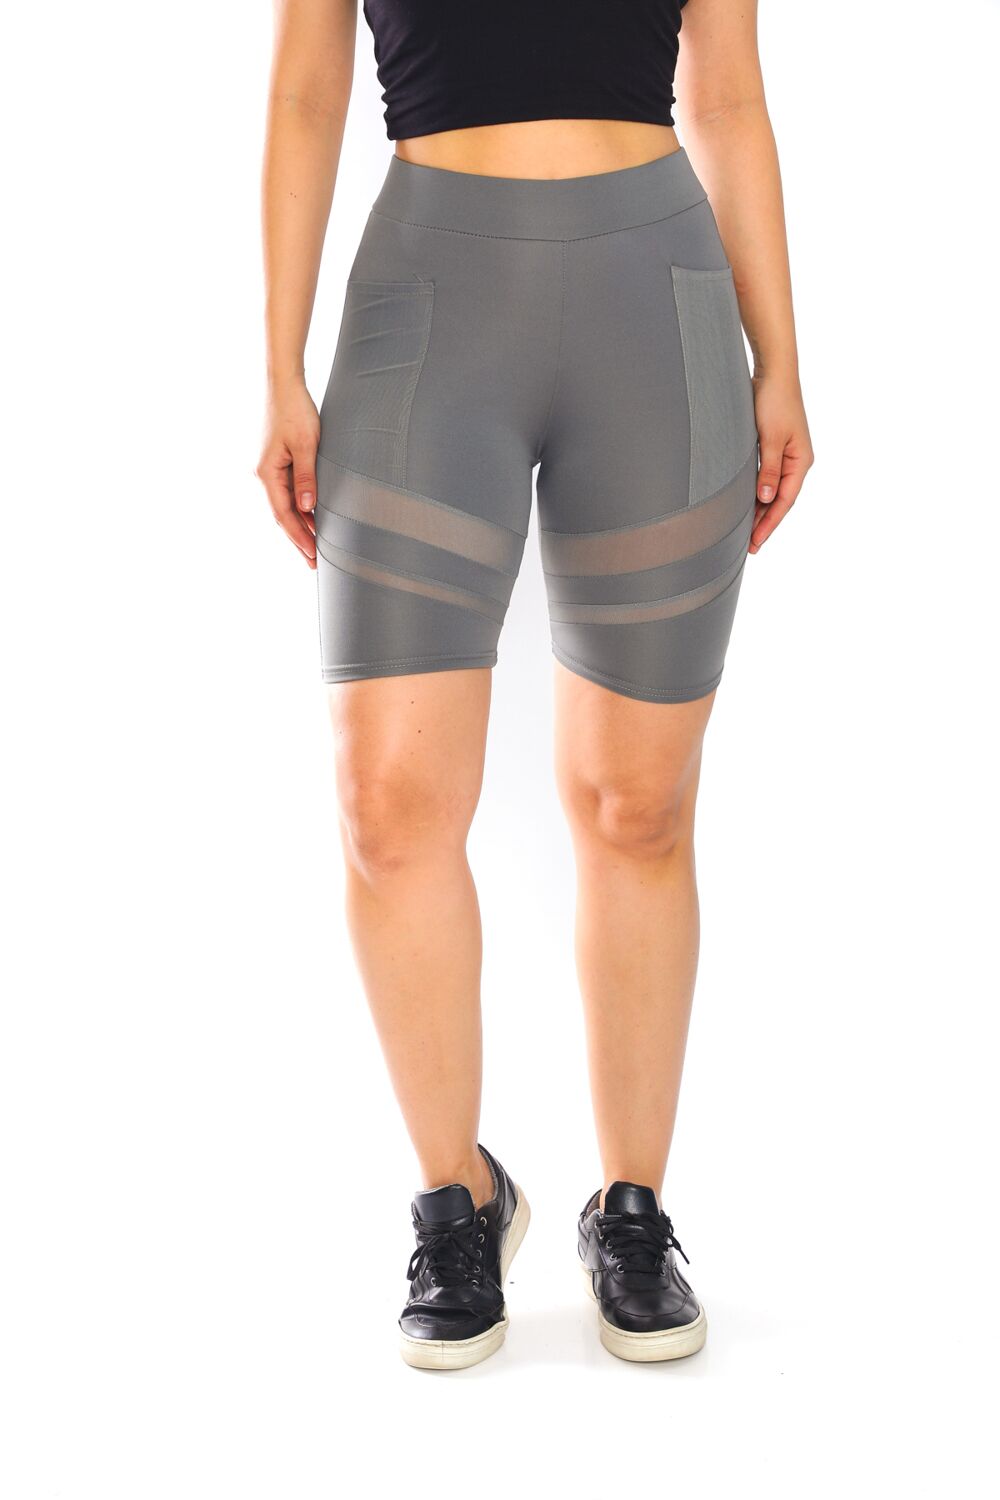 Women's Biker Shorts with Mesh and Pocket - Its All Leggings